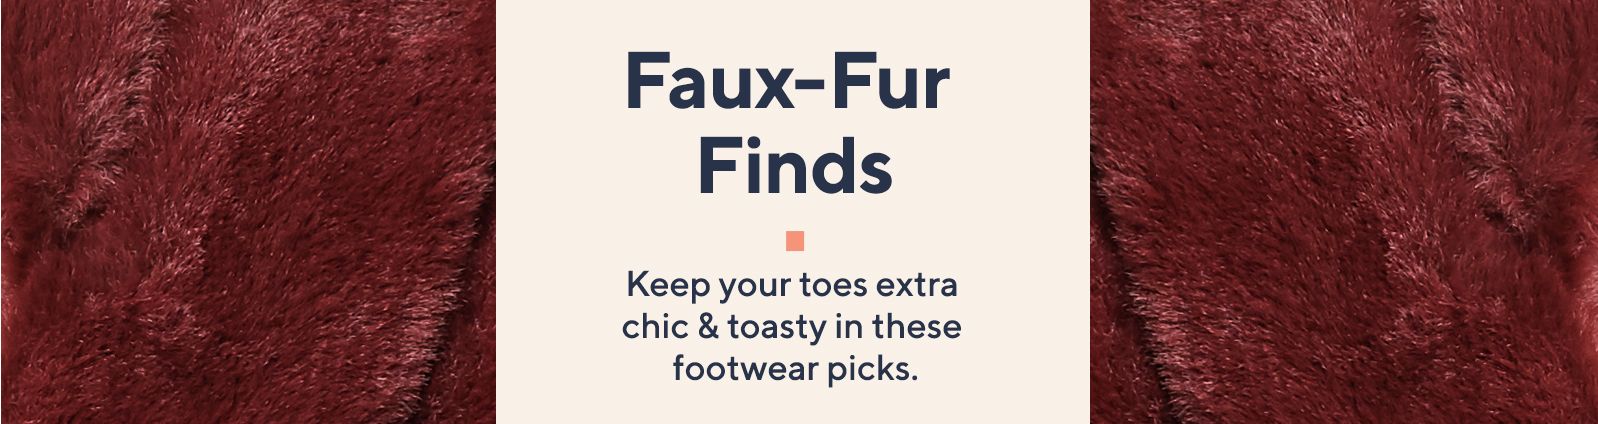 Faux-Fur Finds - Keep your toes extra chic & toasty in these footwear picks.